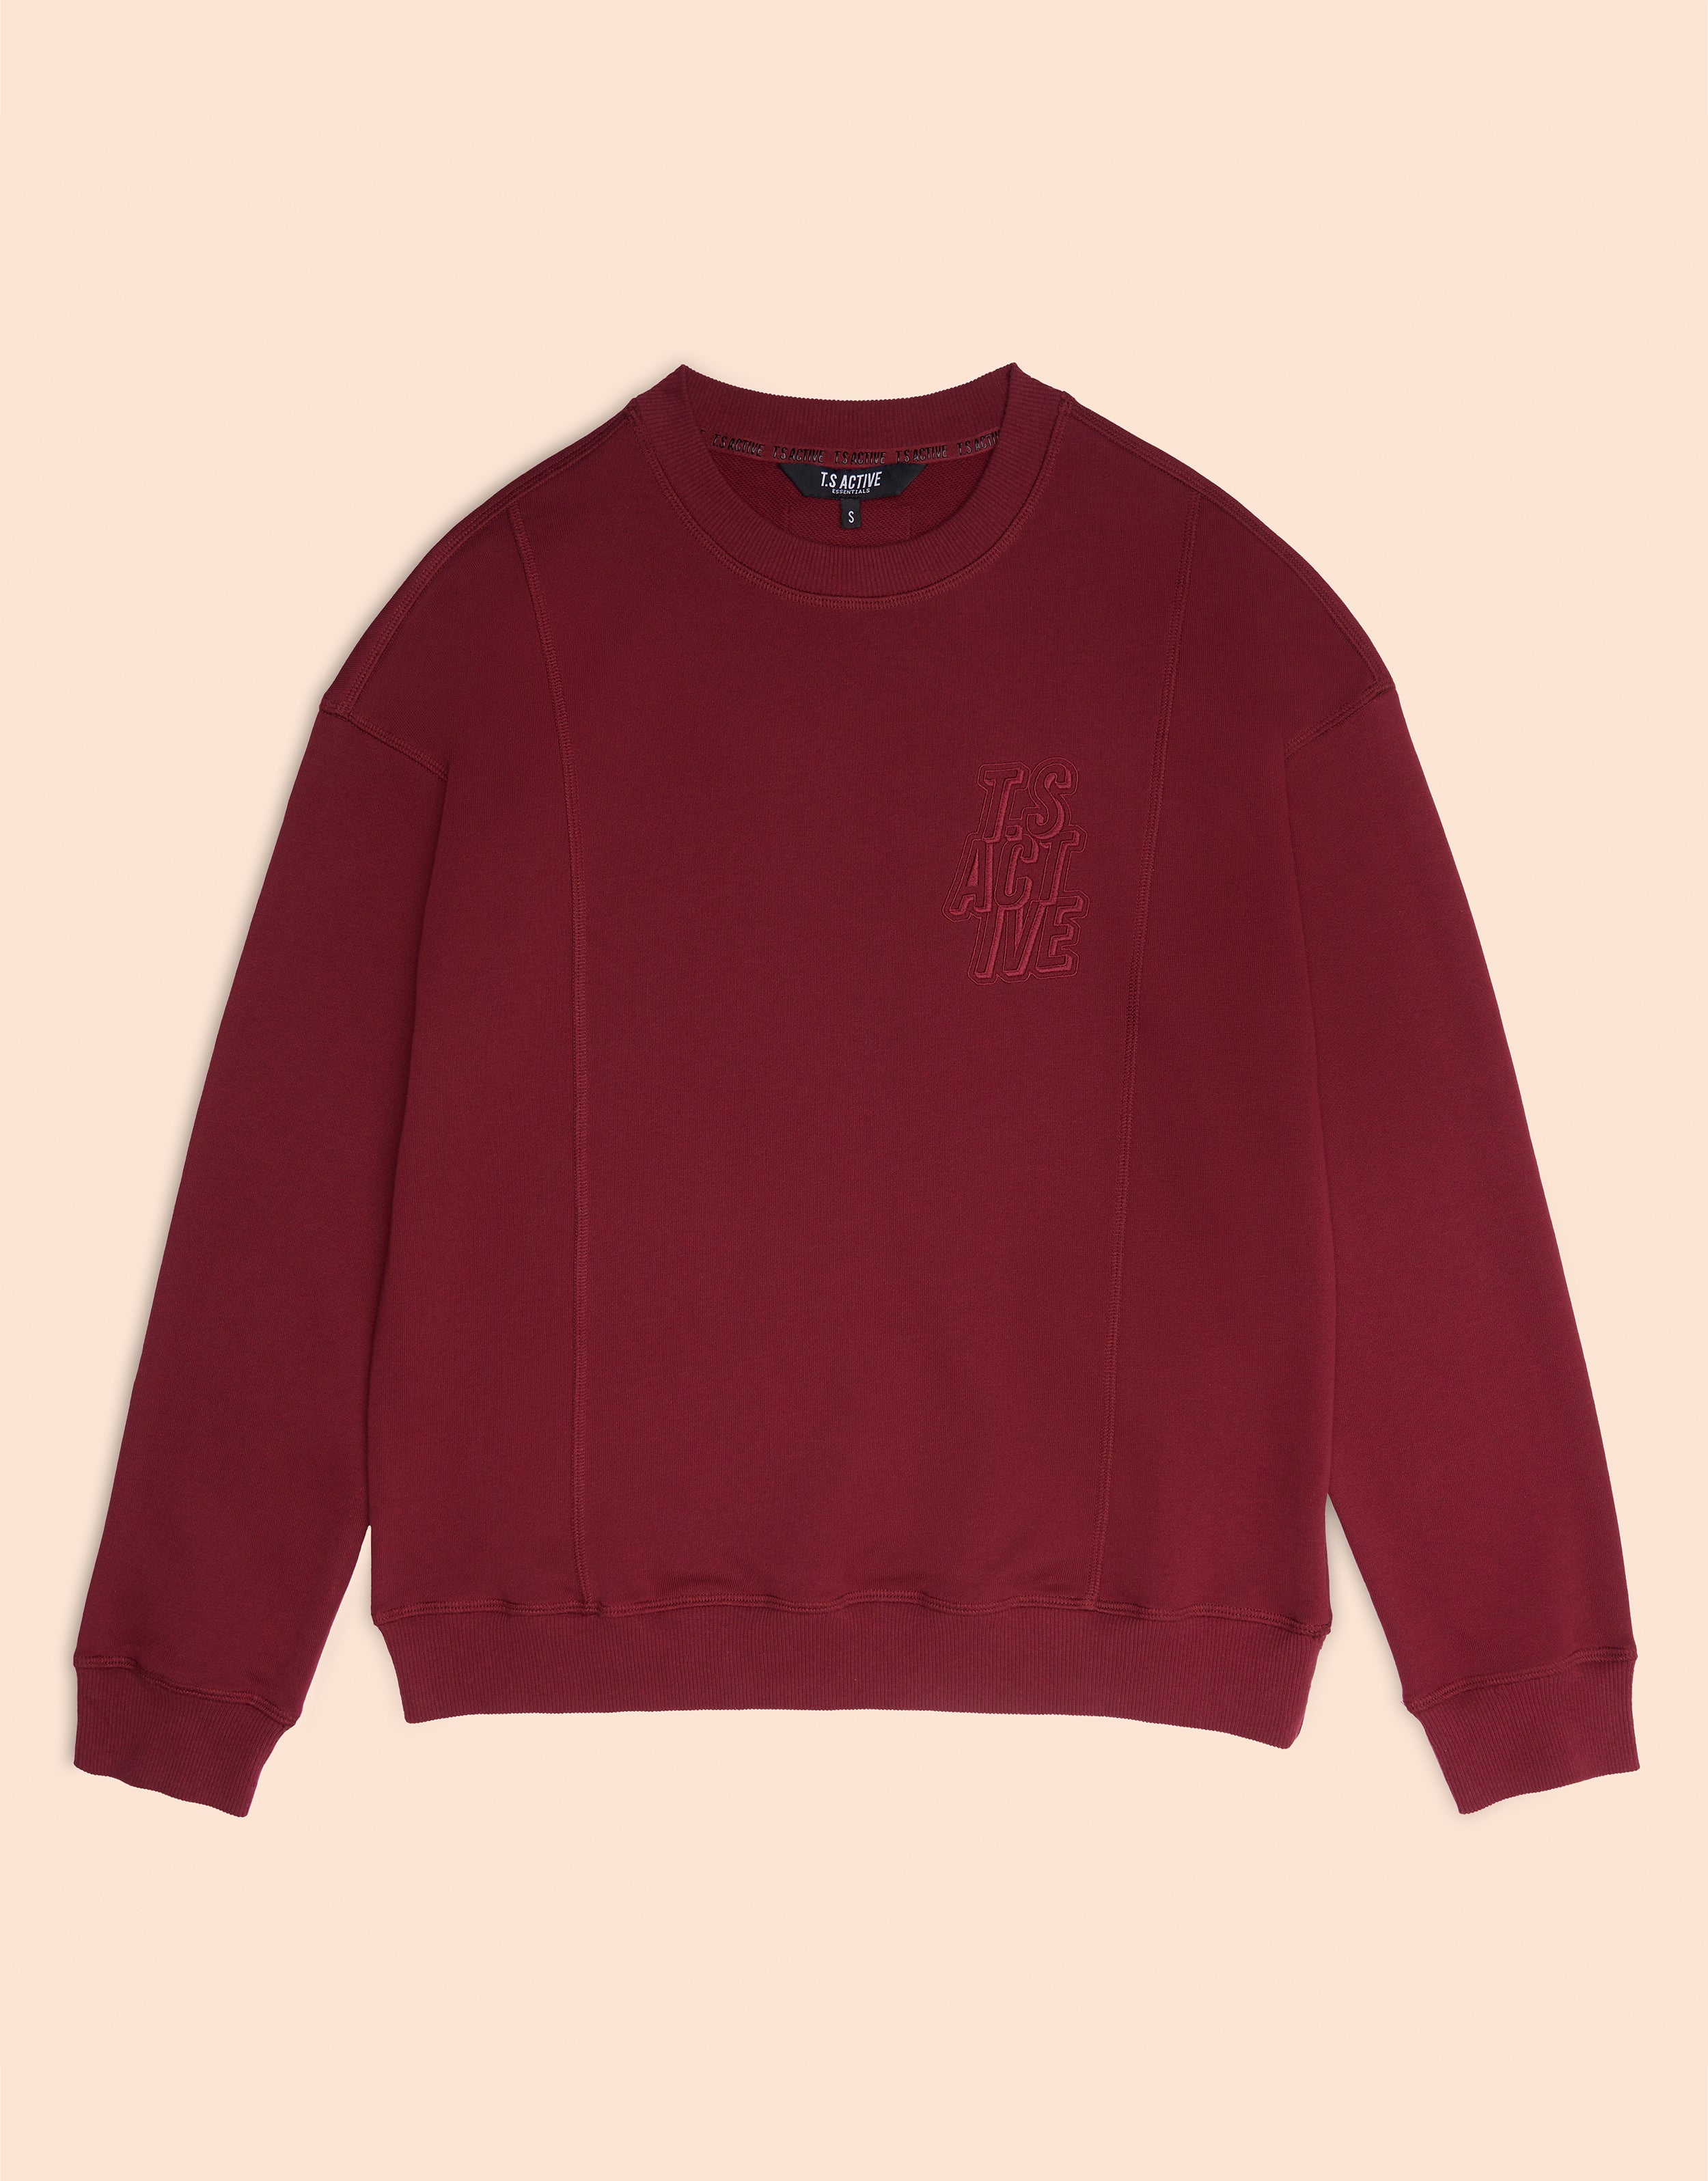 HERITAGE RED SWEATER